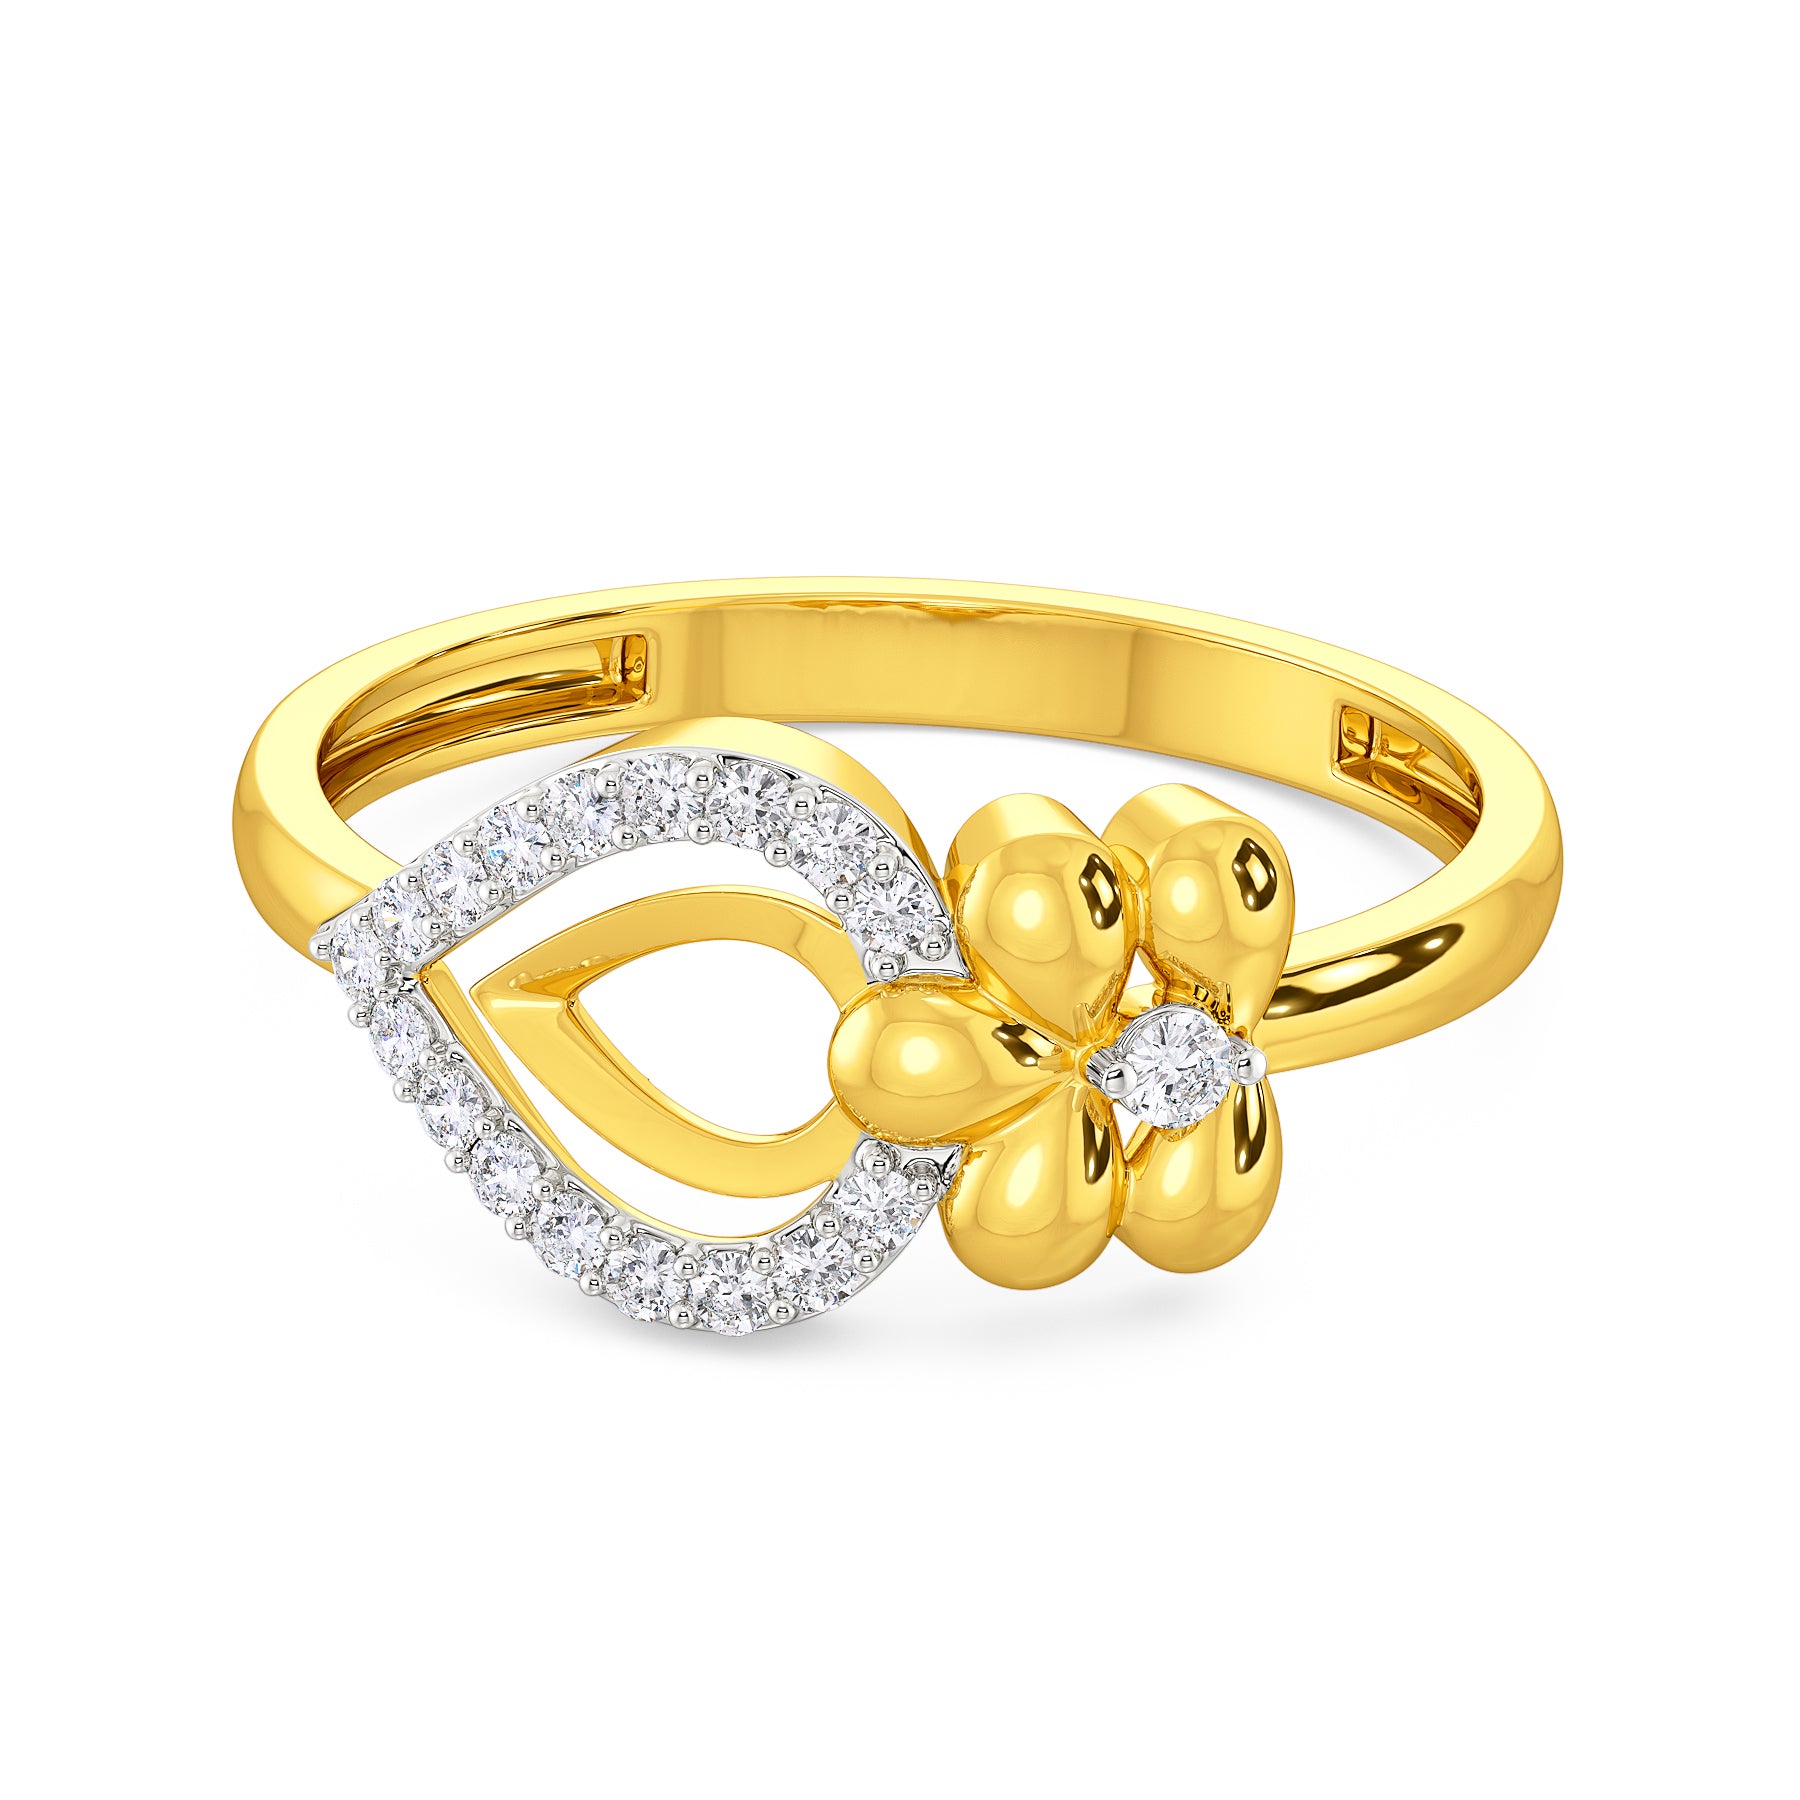 CIFICA The Brass gold Palleted ring design for female is made to exude  every woman's femininity